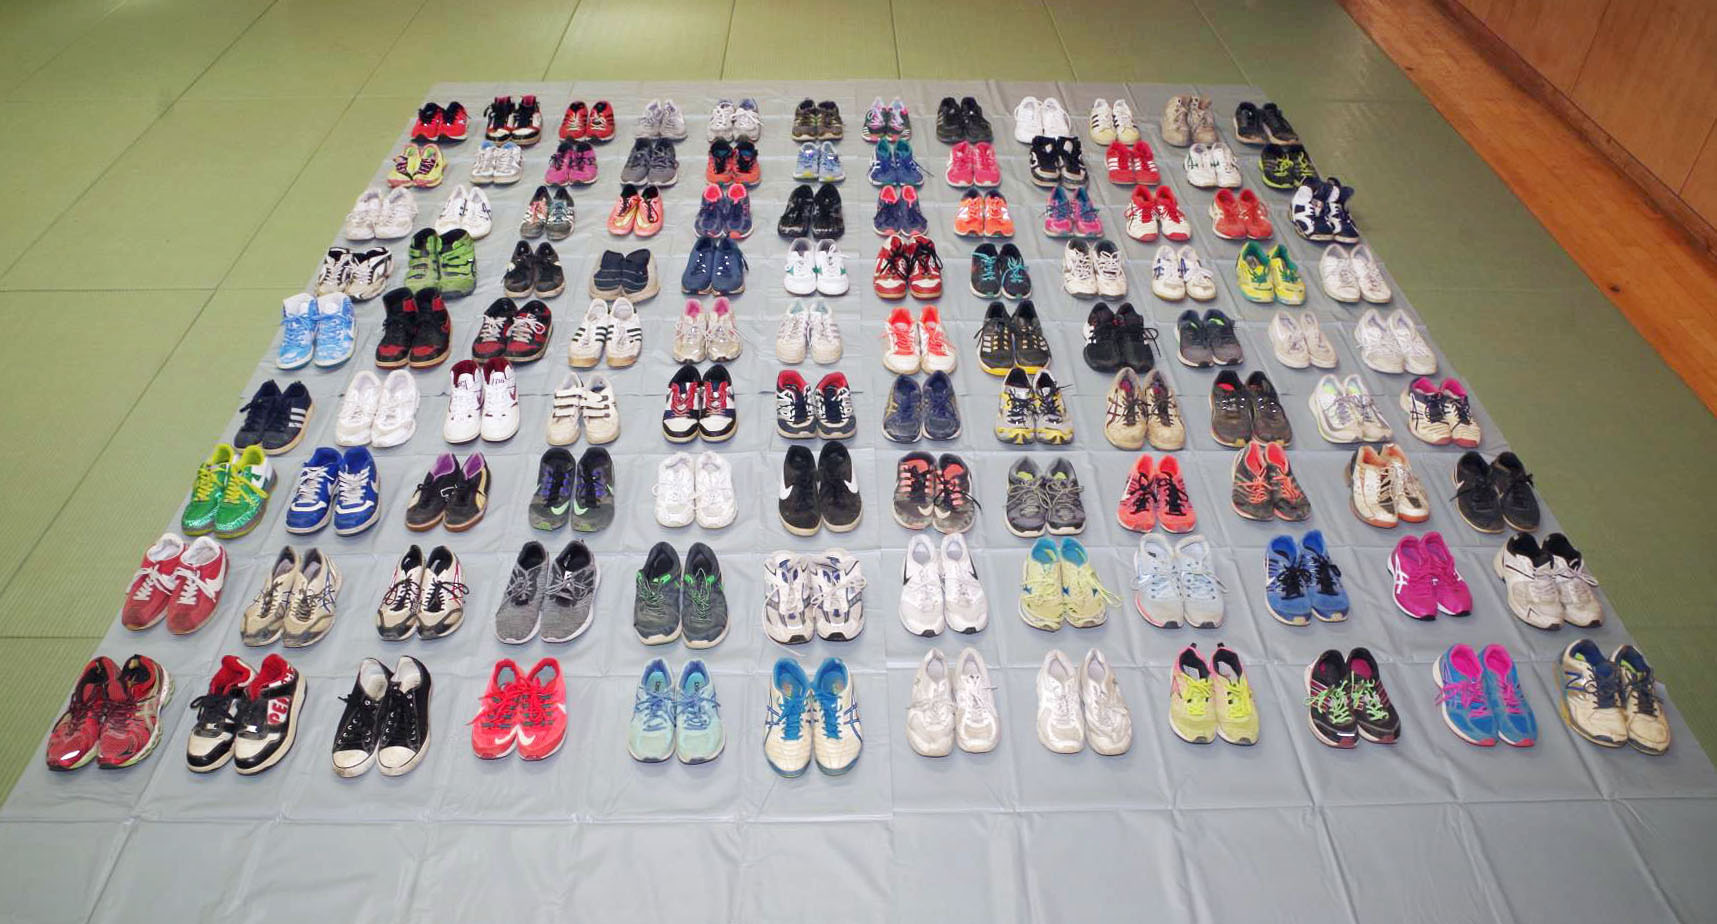 Japanese man arrested for stealing women’s shoes and replacing them with new ones